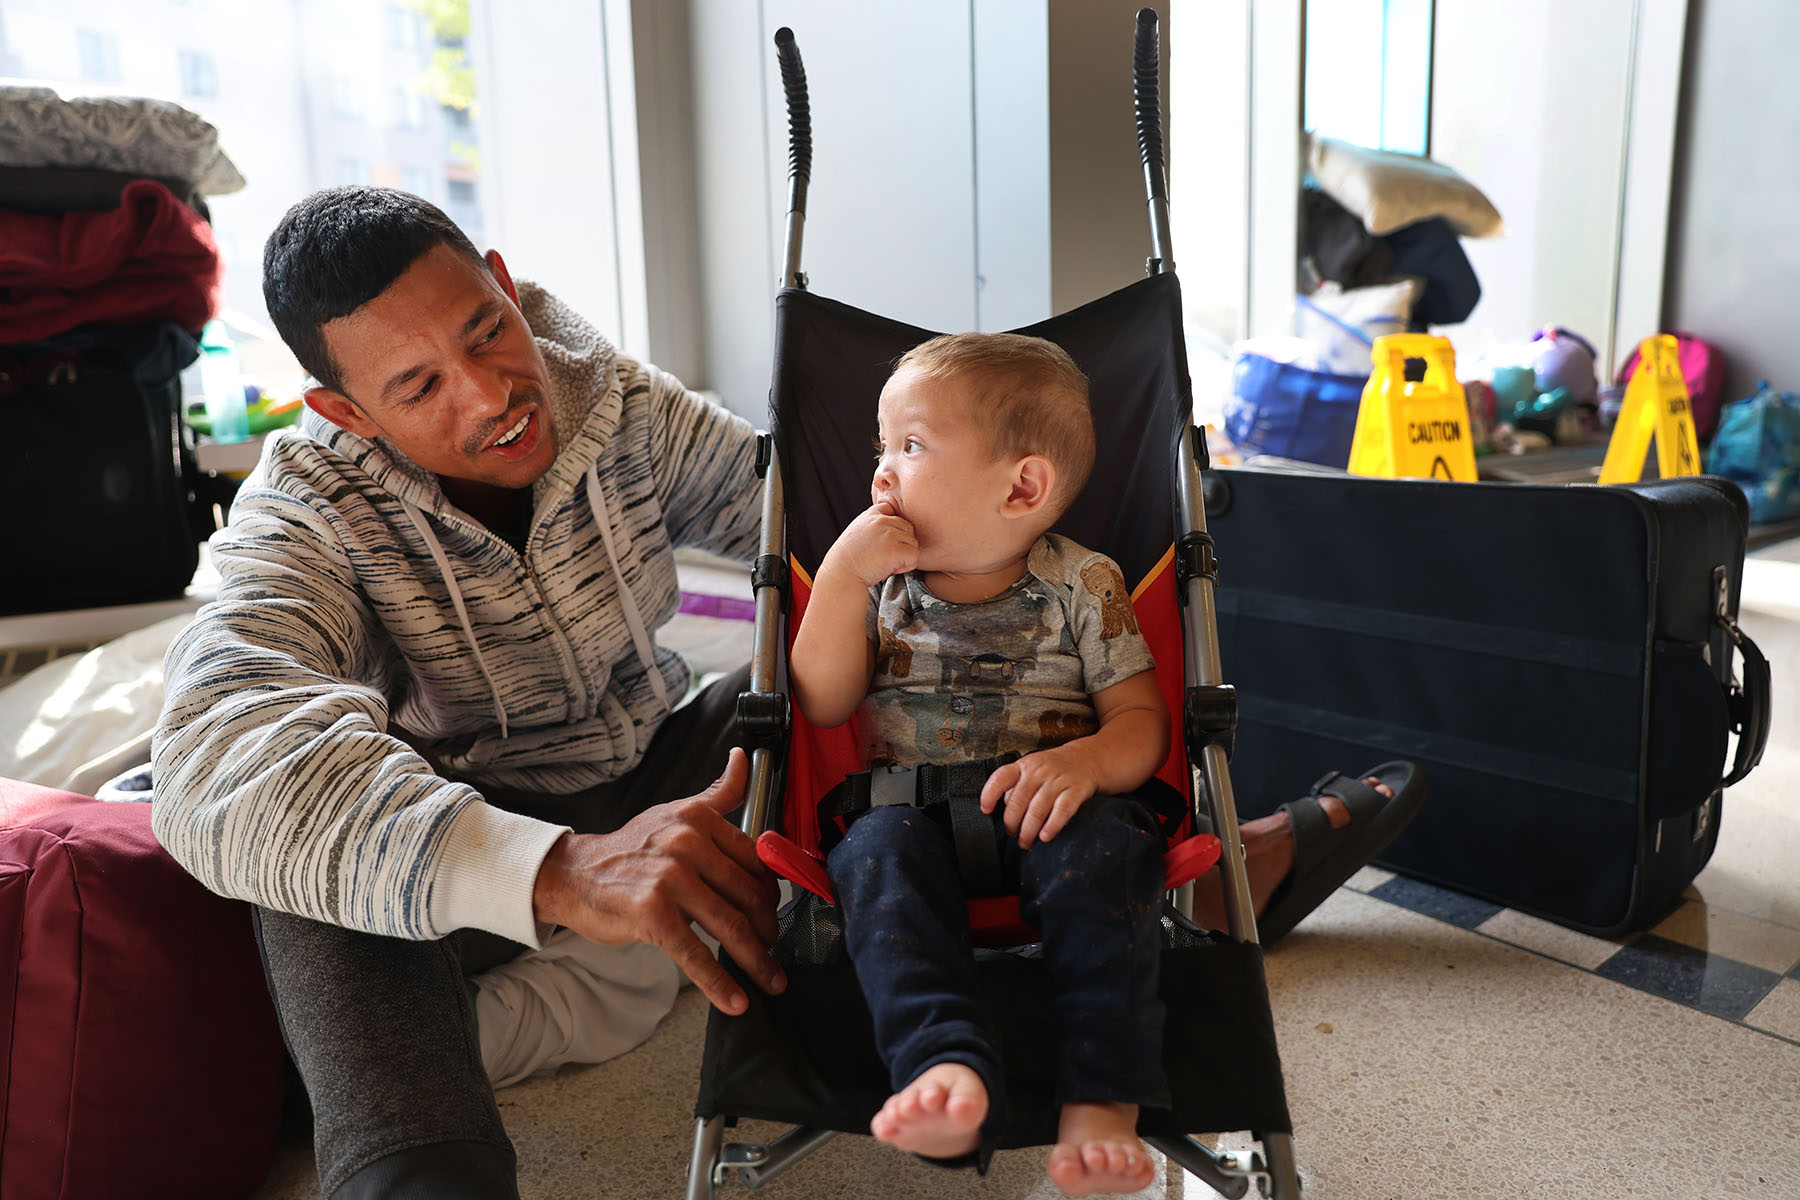 A migrant father from Venezuela entertains his 15-month-old son in the lobby of a Chicago police station.